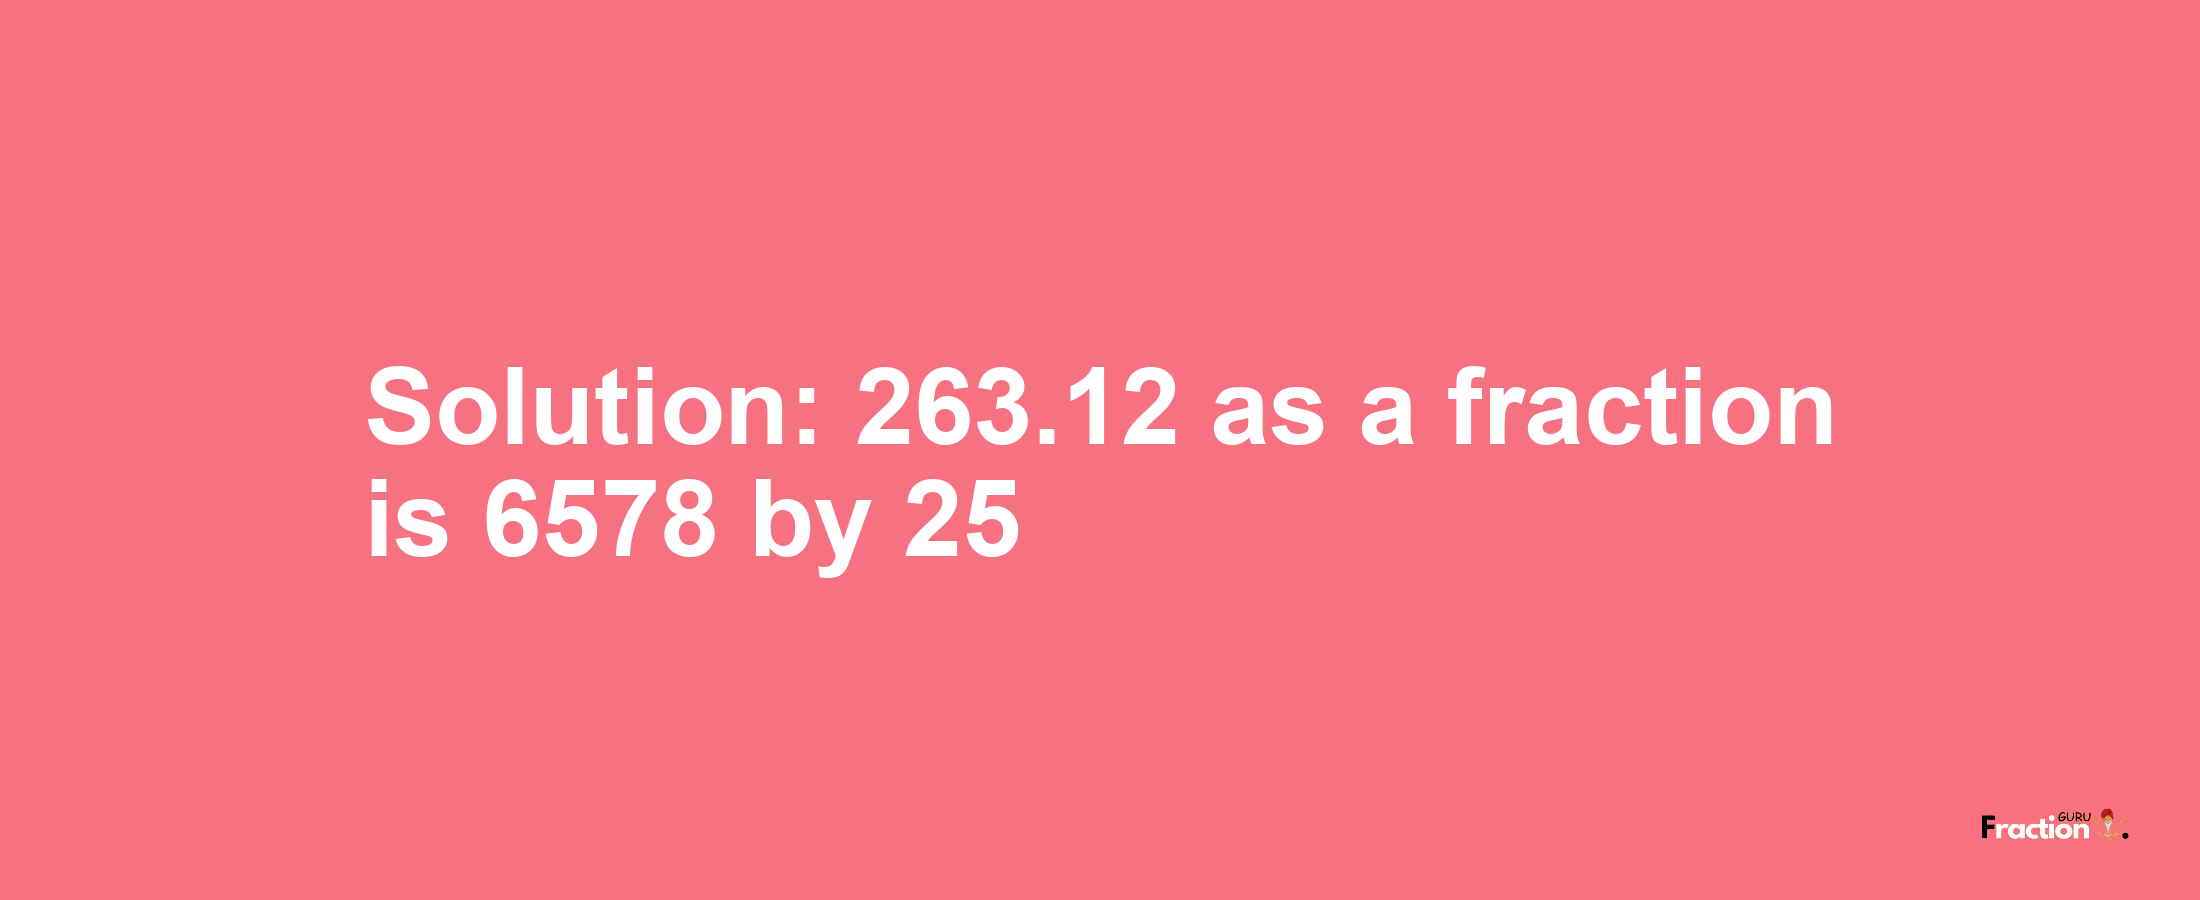 Solution:263.12 as a fraction is 6578/25